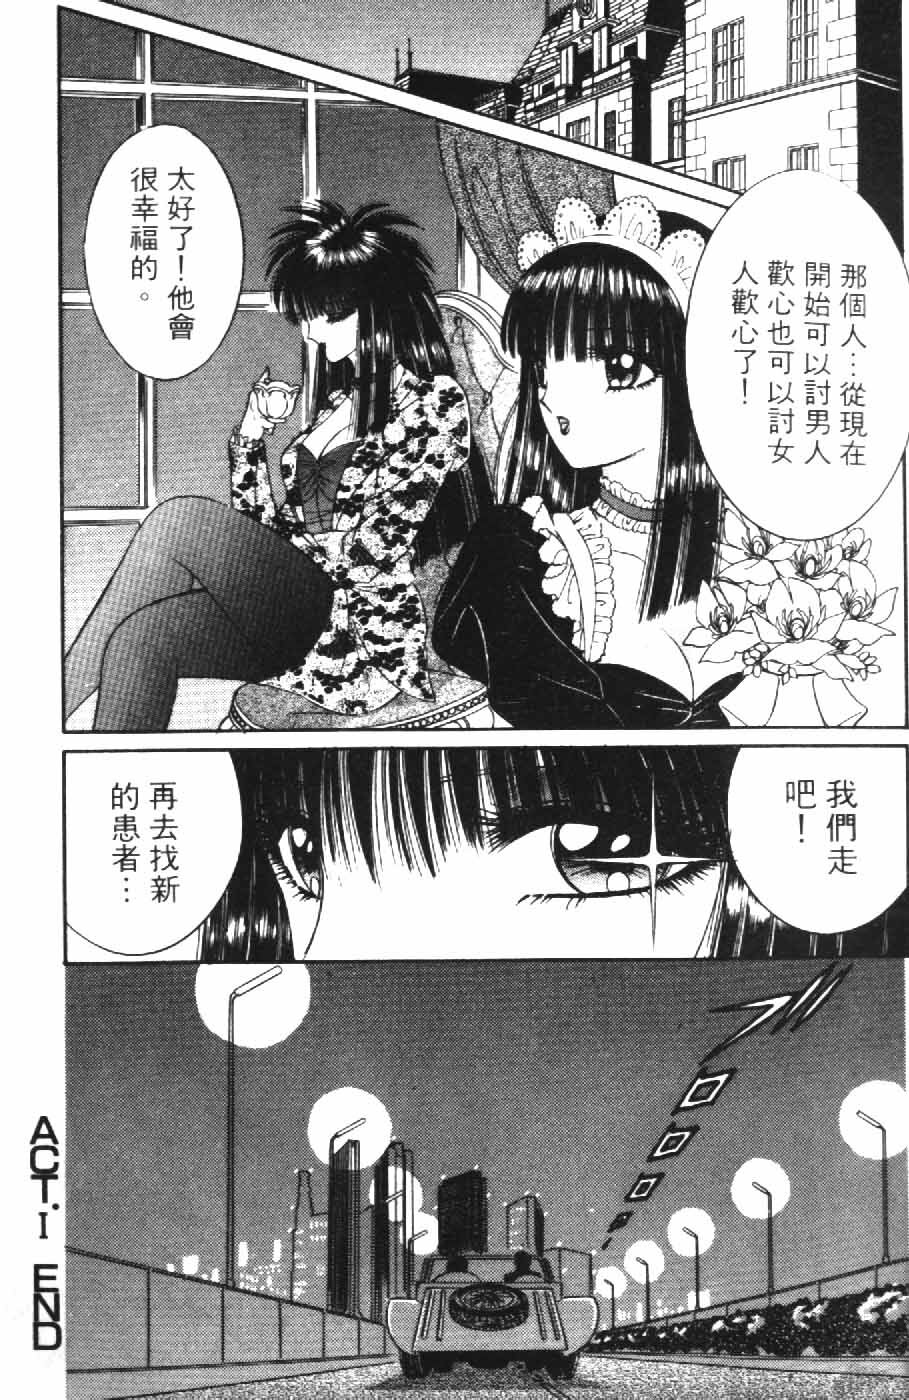 [Senno Knife] Ouma ga Horror Show 2 - Trans Sexual Special Show 2 | 顫慄博覽會 2 [Chinese] page 23 full